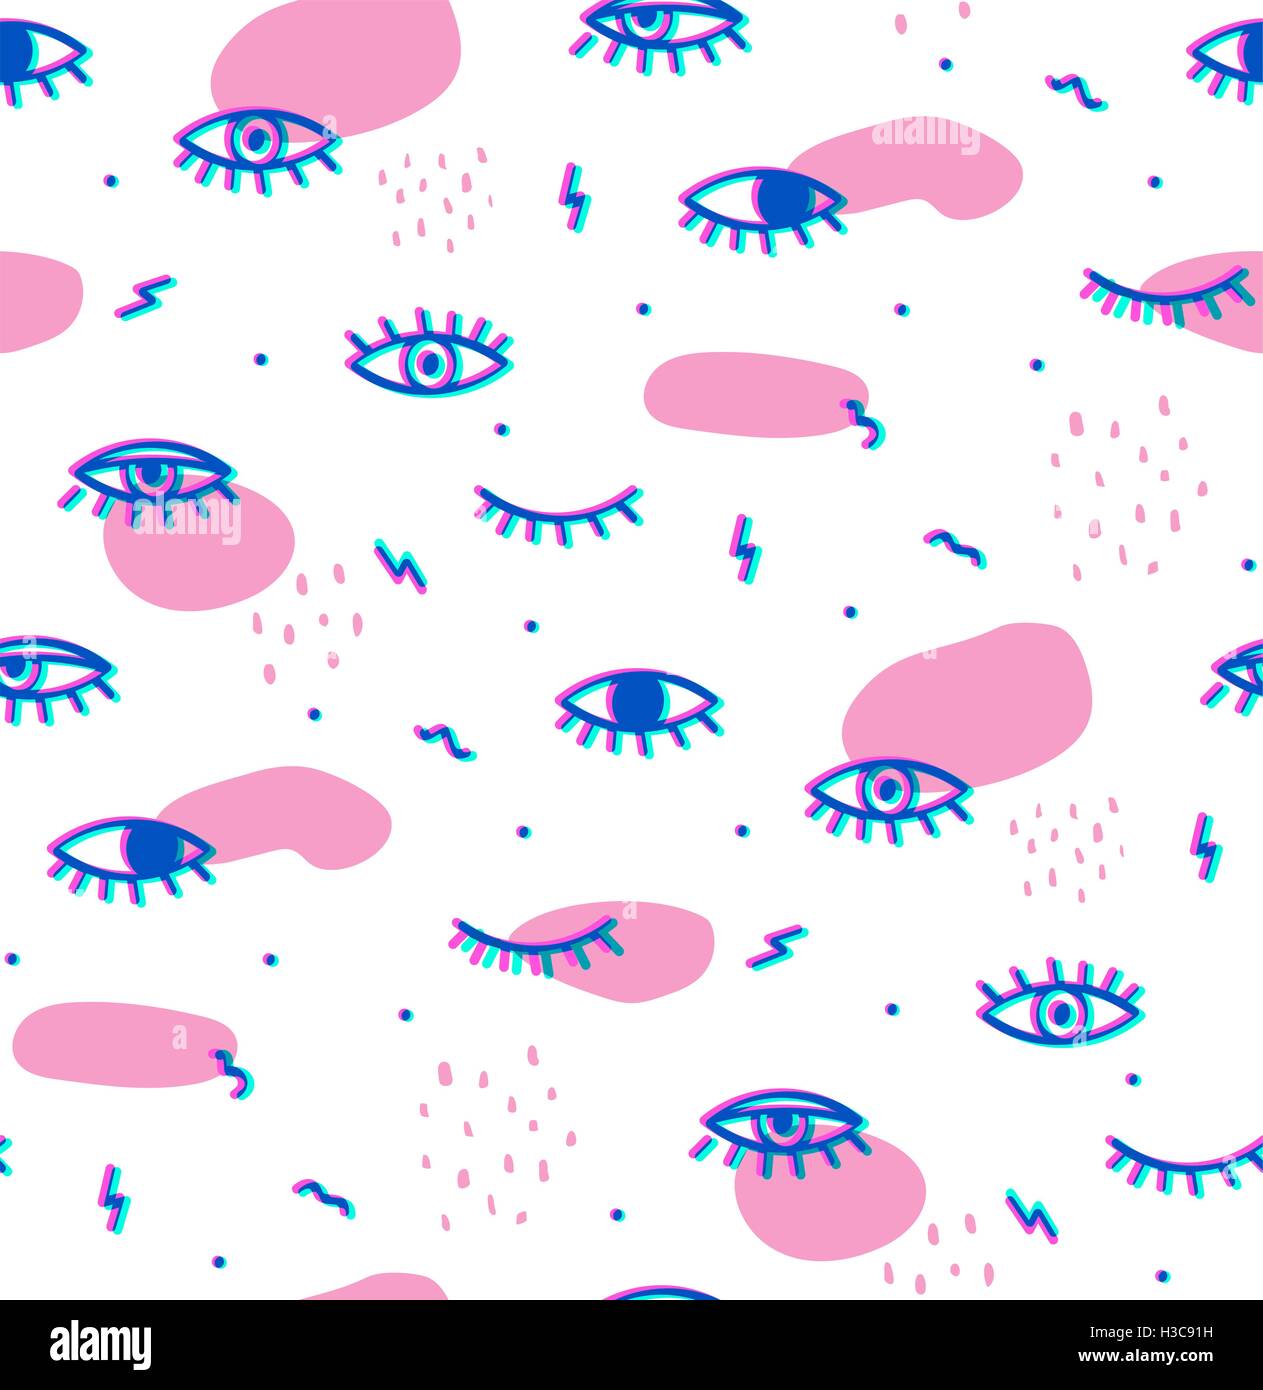 Seamless pattern in the style of psychedelic eyes. Stock Vector